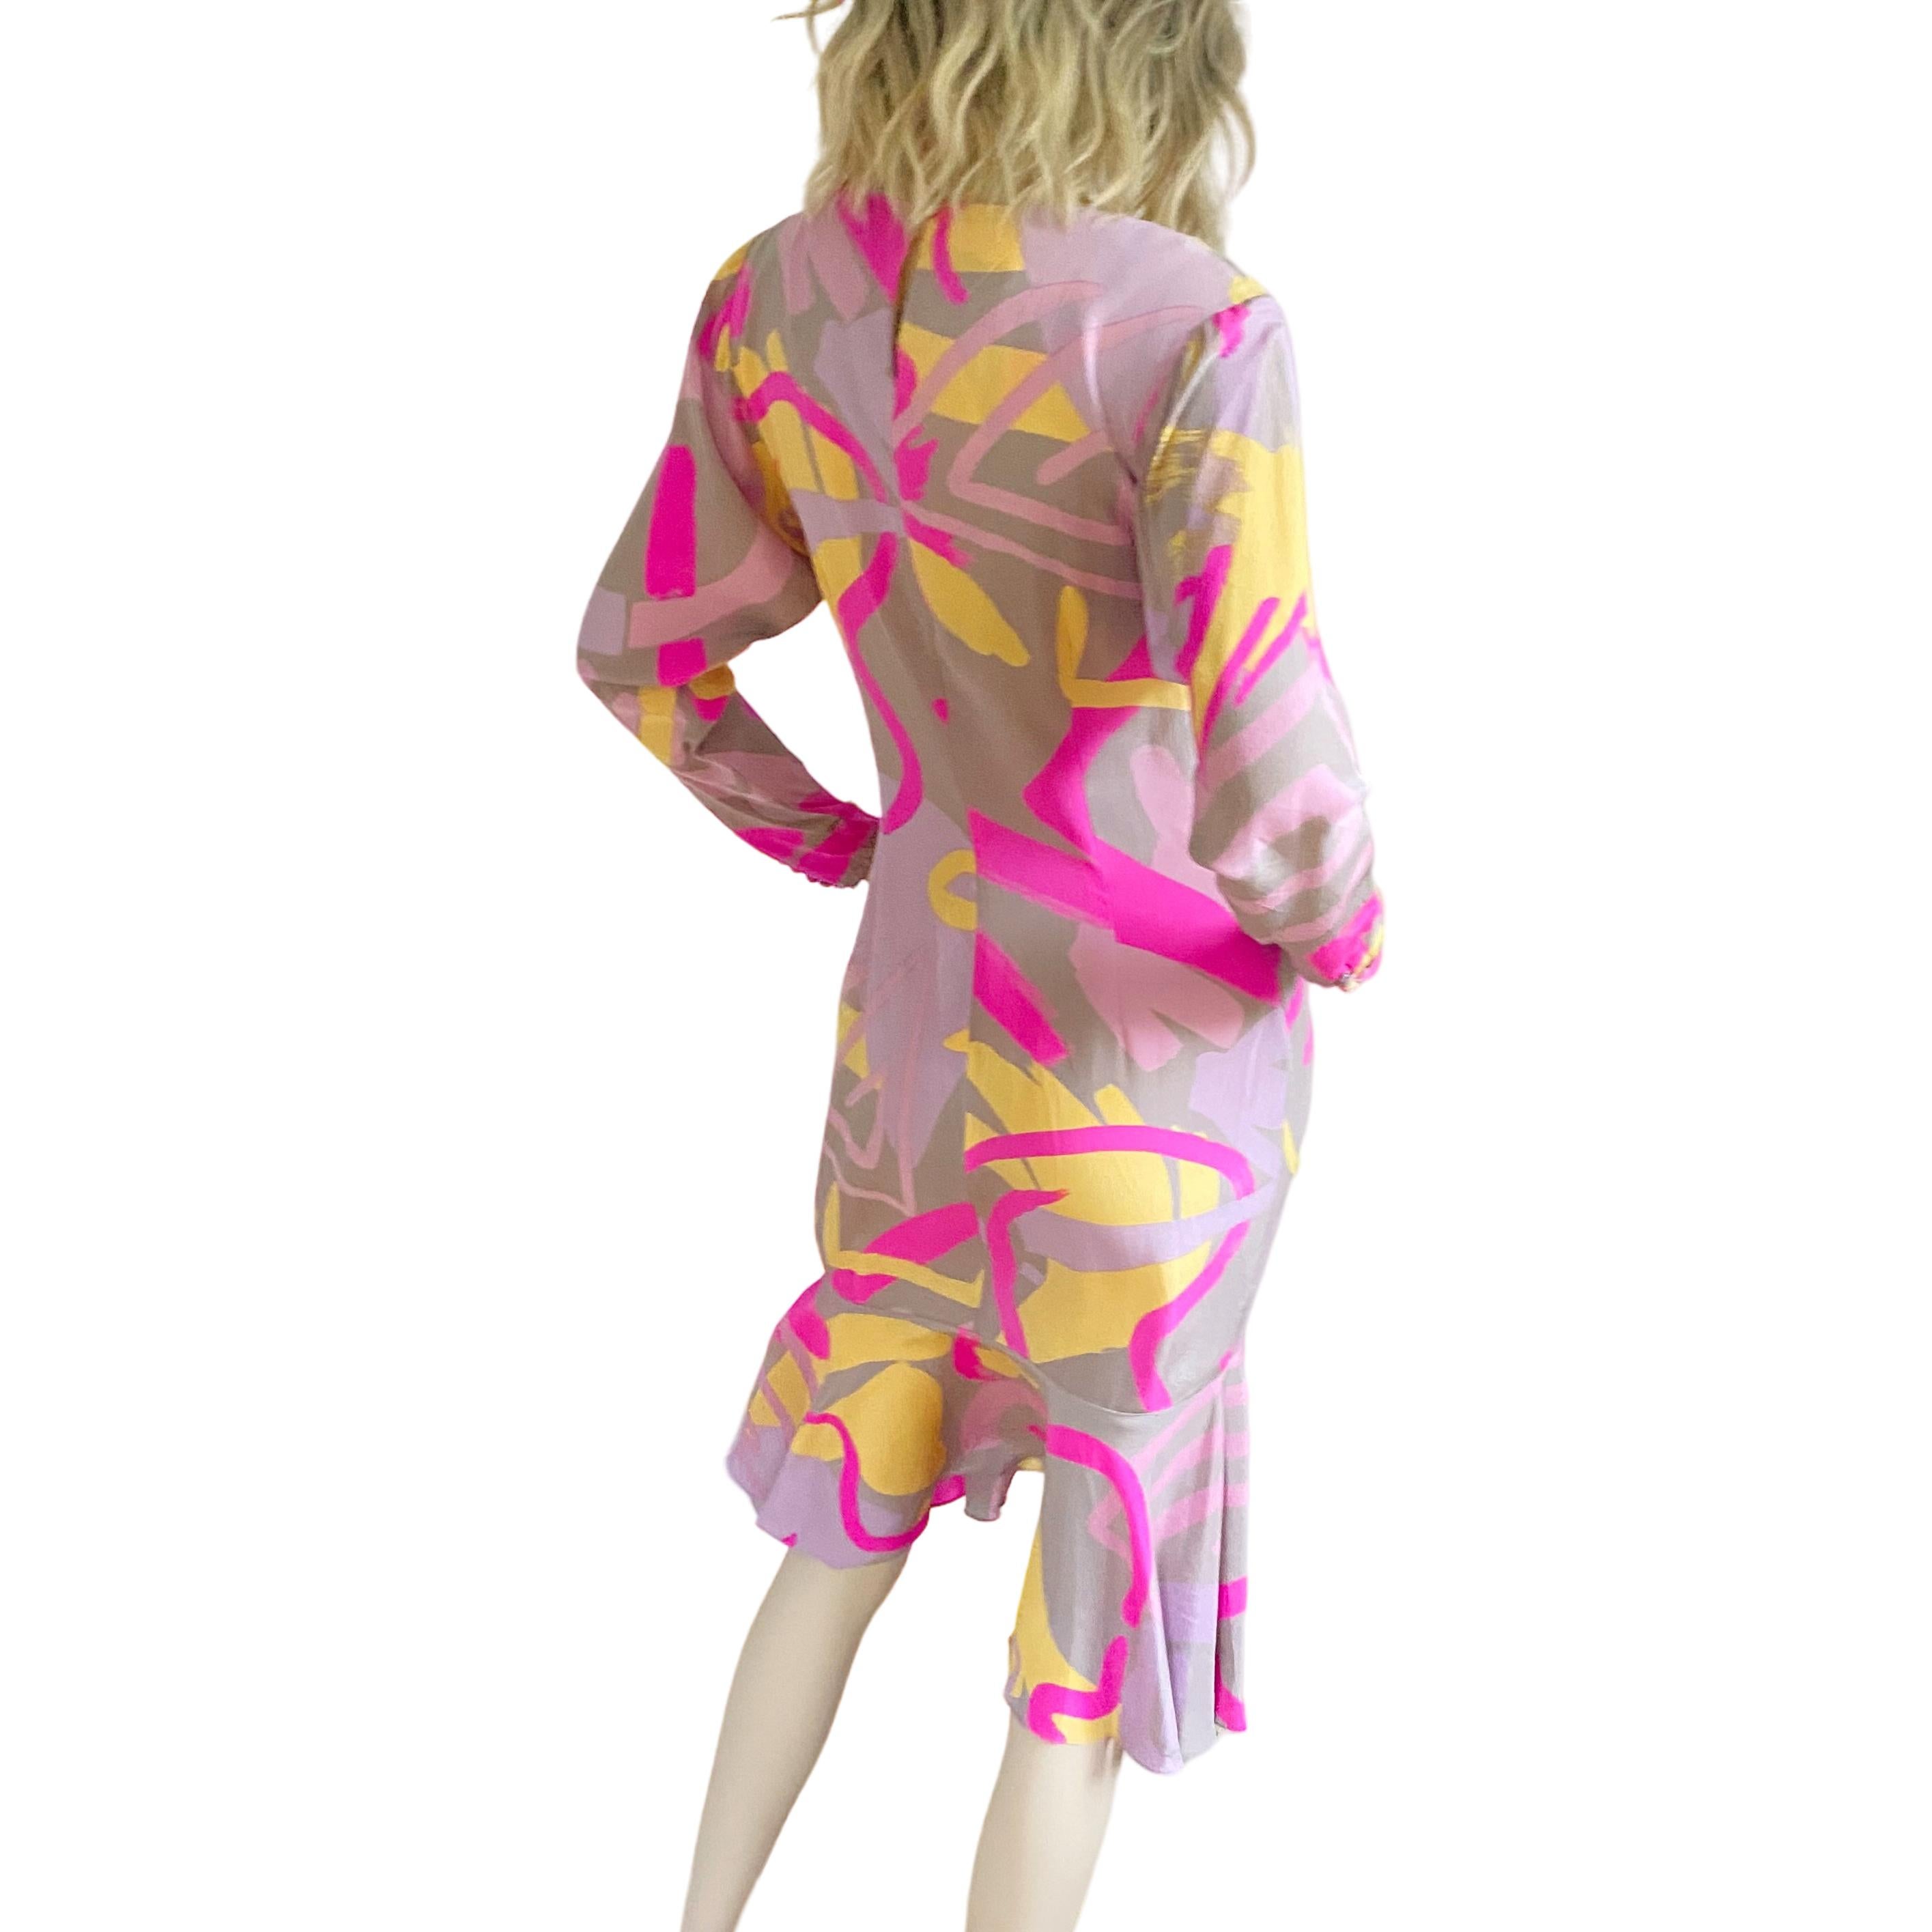 Name: Flora Kung Ari dress.
Style: Long sleeve dress with fishtail flutter.
Print: Freehand neon print
Colors: Pastel gray, neon pink, soft pink, lavender and yellow
Entry: Hidden side zipper with hook and eye, back keyhole
Fabric: 100% silk